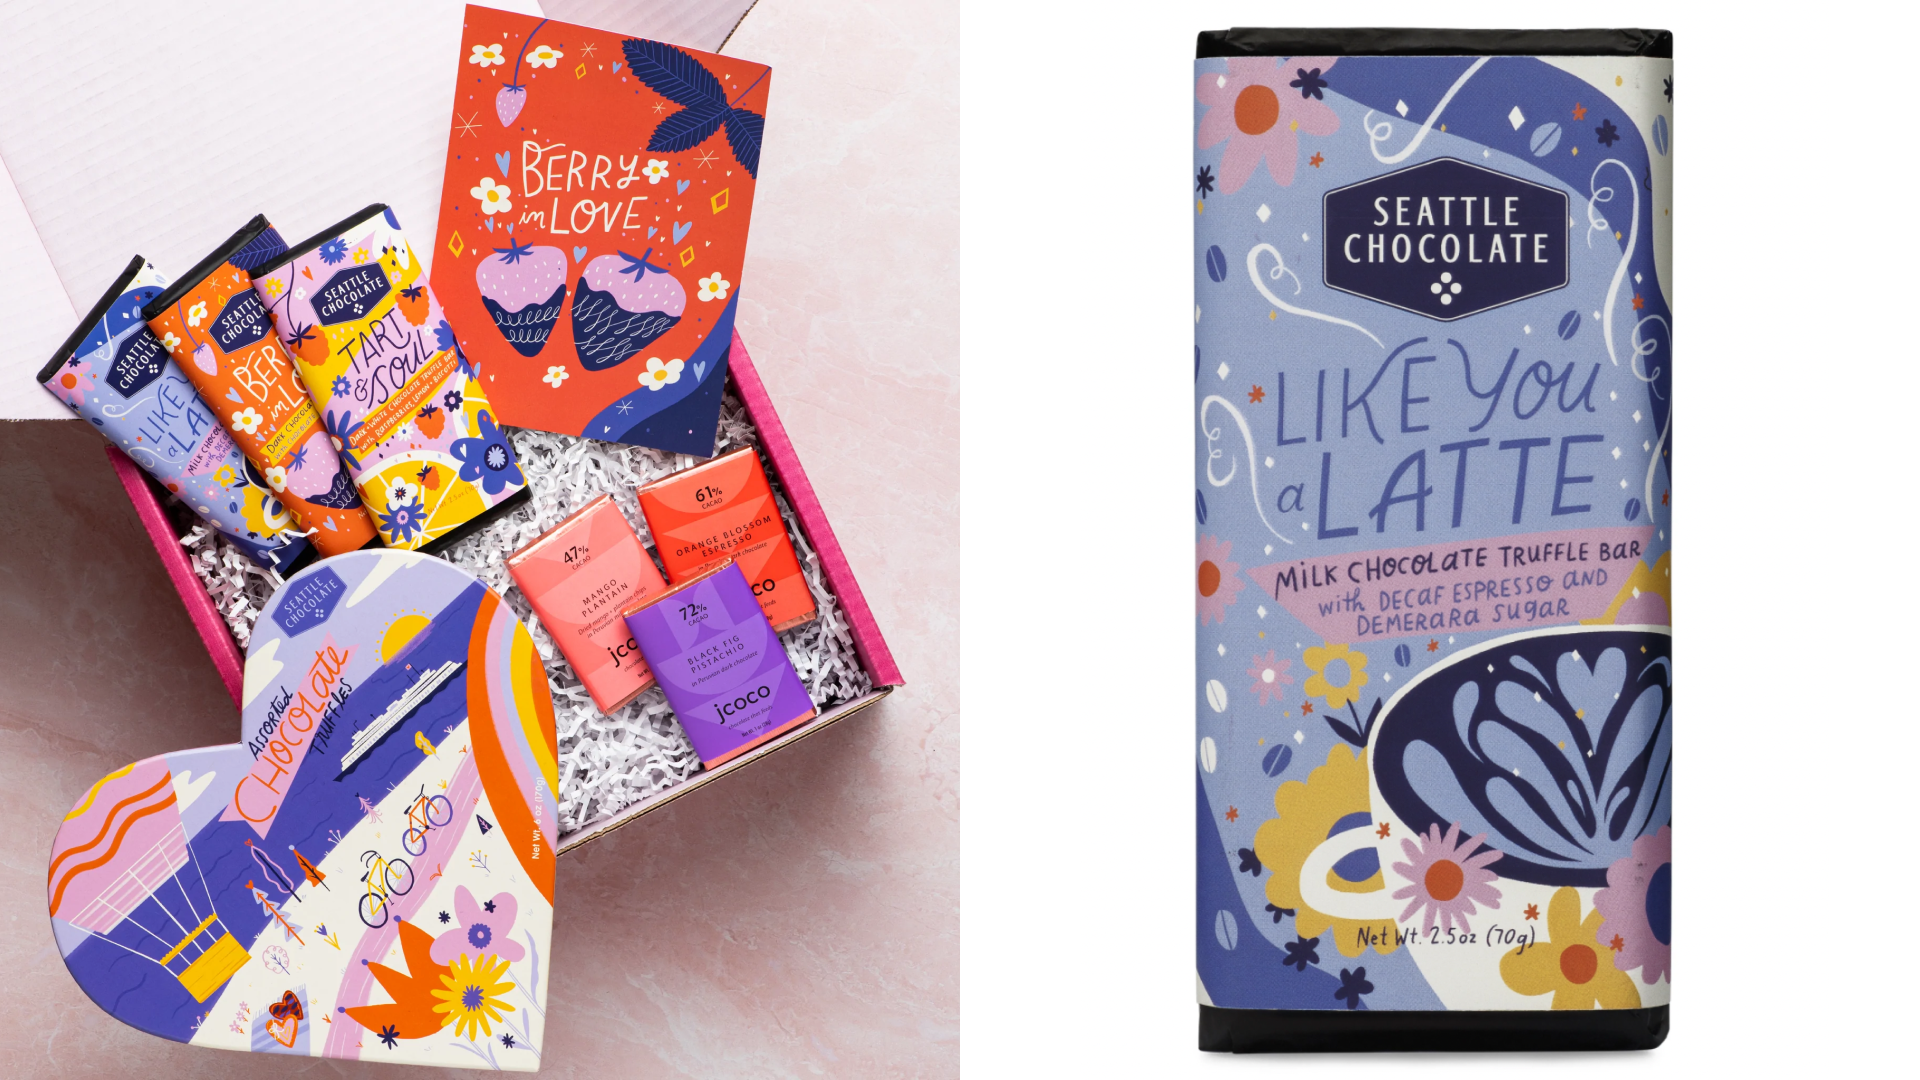 Seattle Chocolate bar and truffles breakup gifts